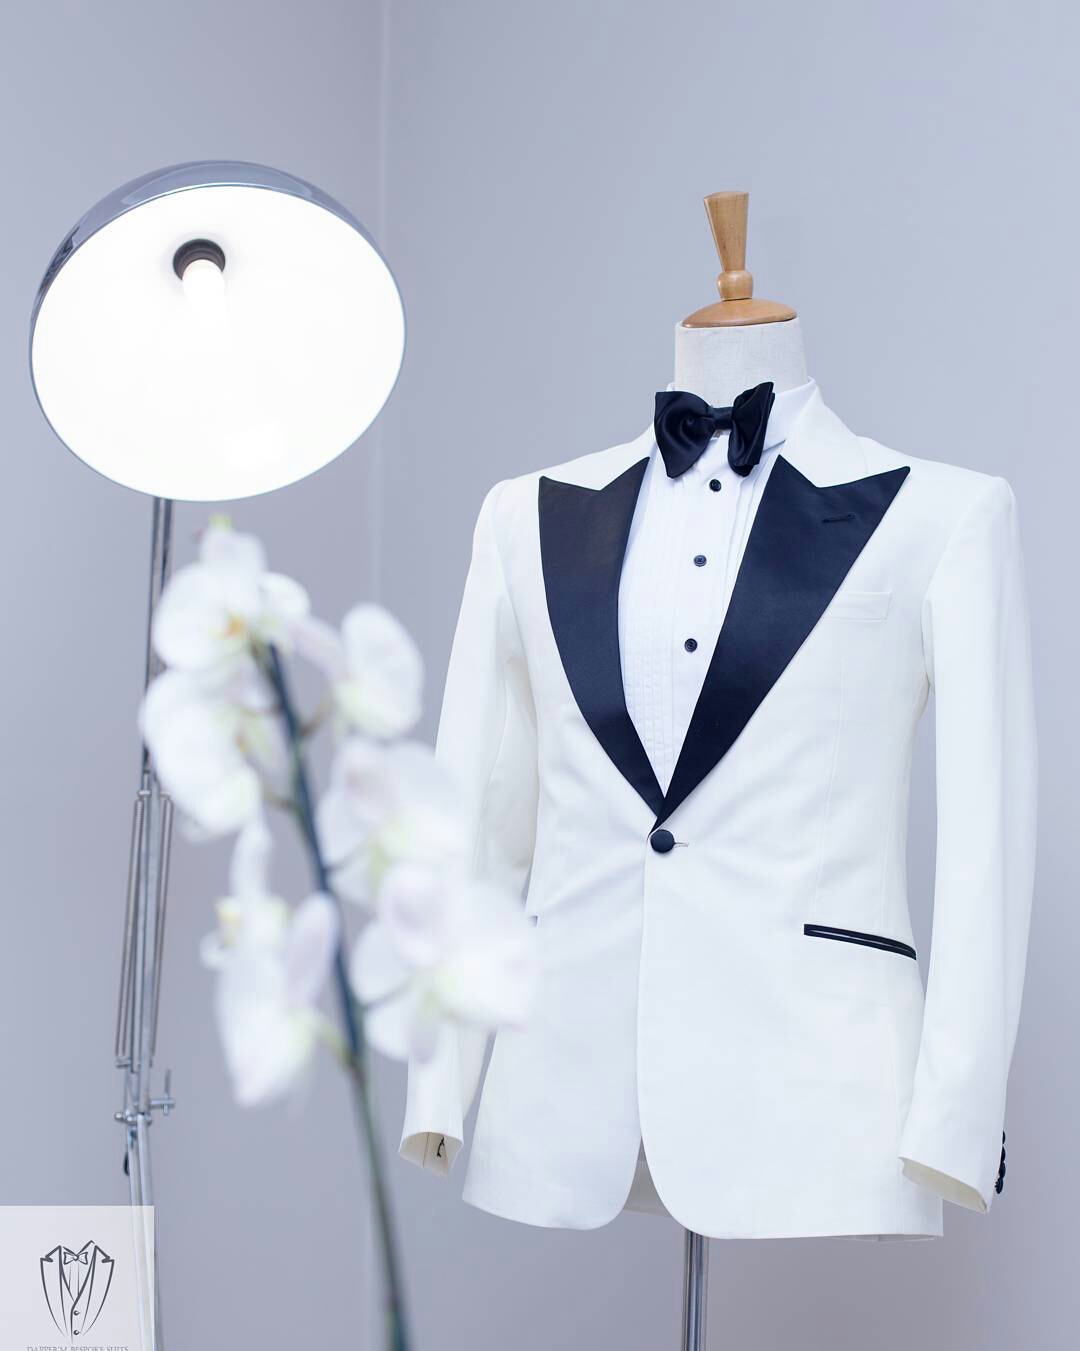 Tuxedo Styles that Suit Dressy Occassions4